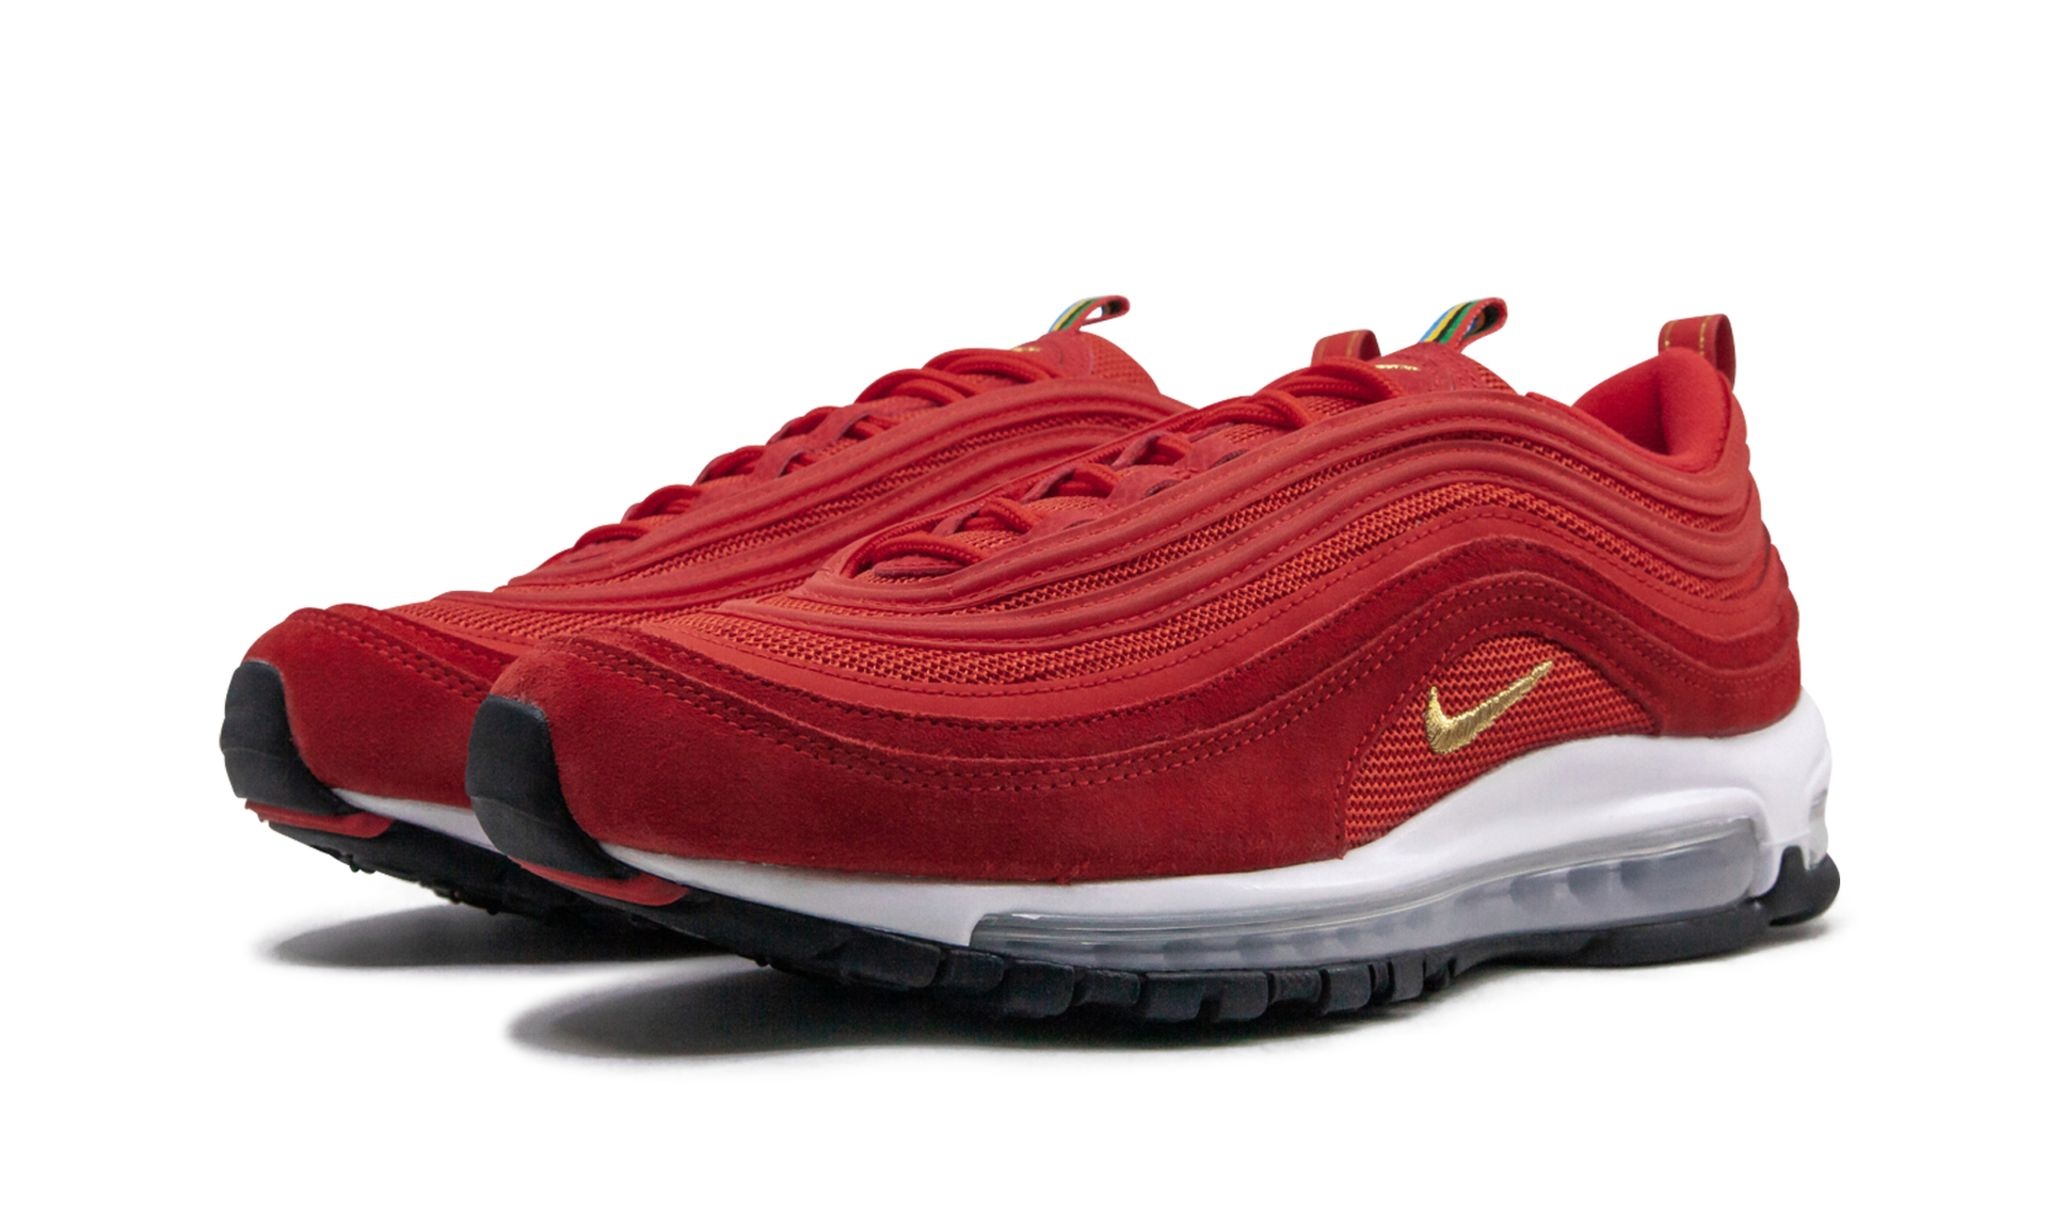 Air Max 97 QS "Olympic Rings Pack - Red" - 2